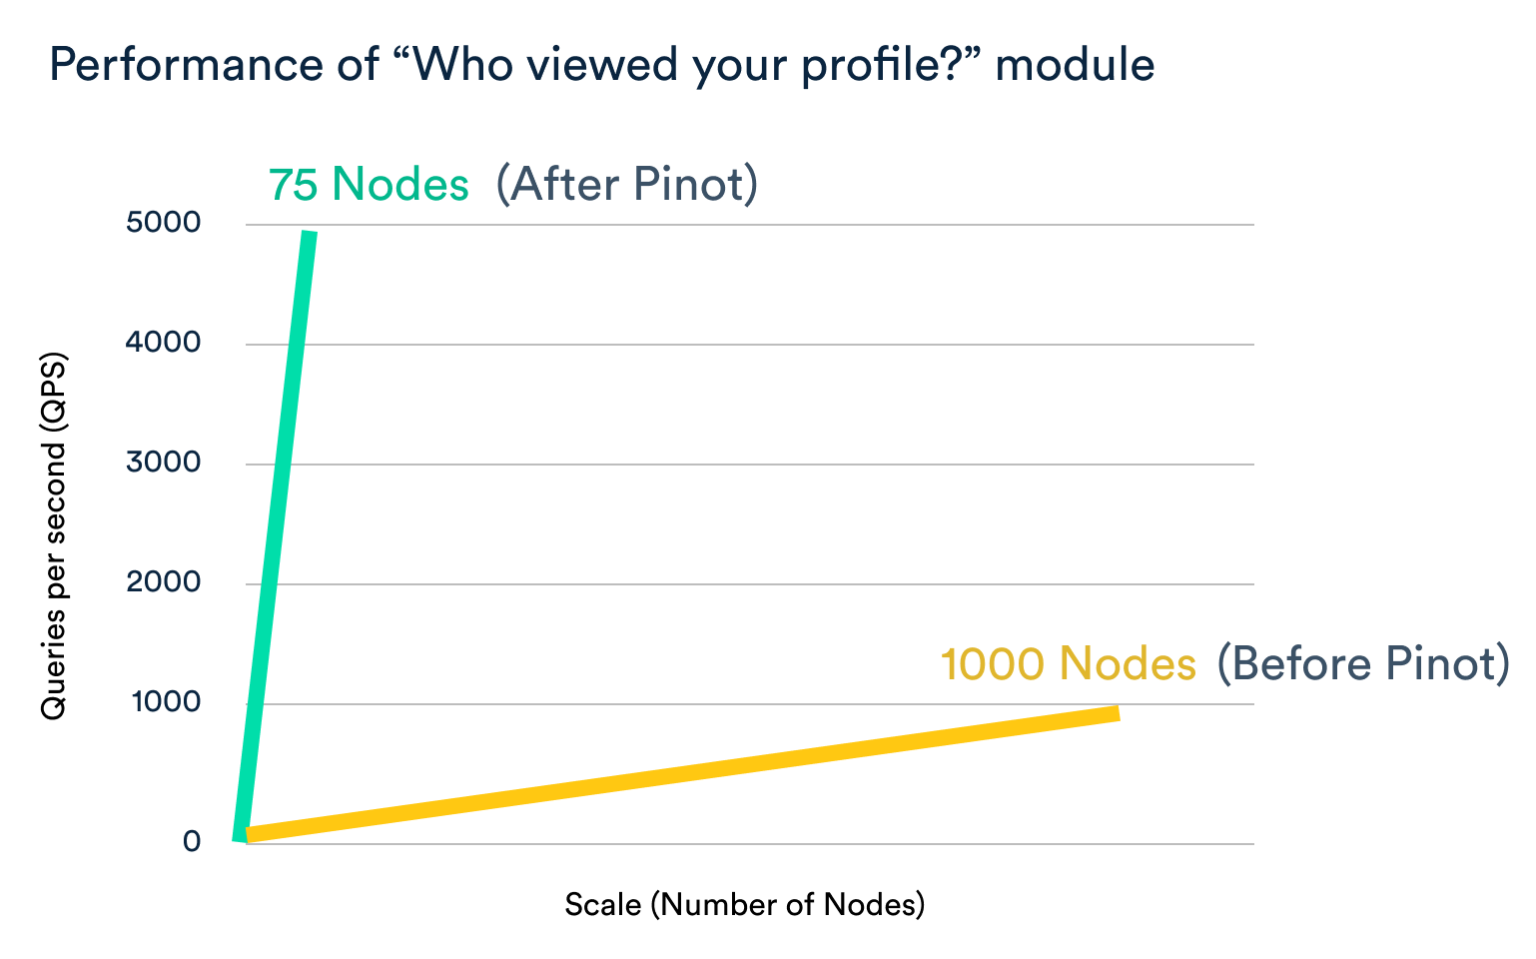 Number of nodes before and after Apache Pinot